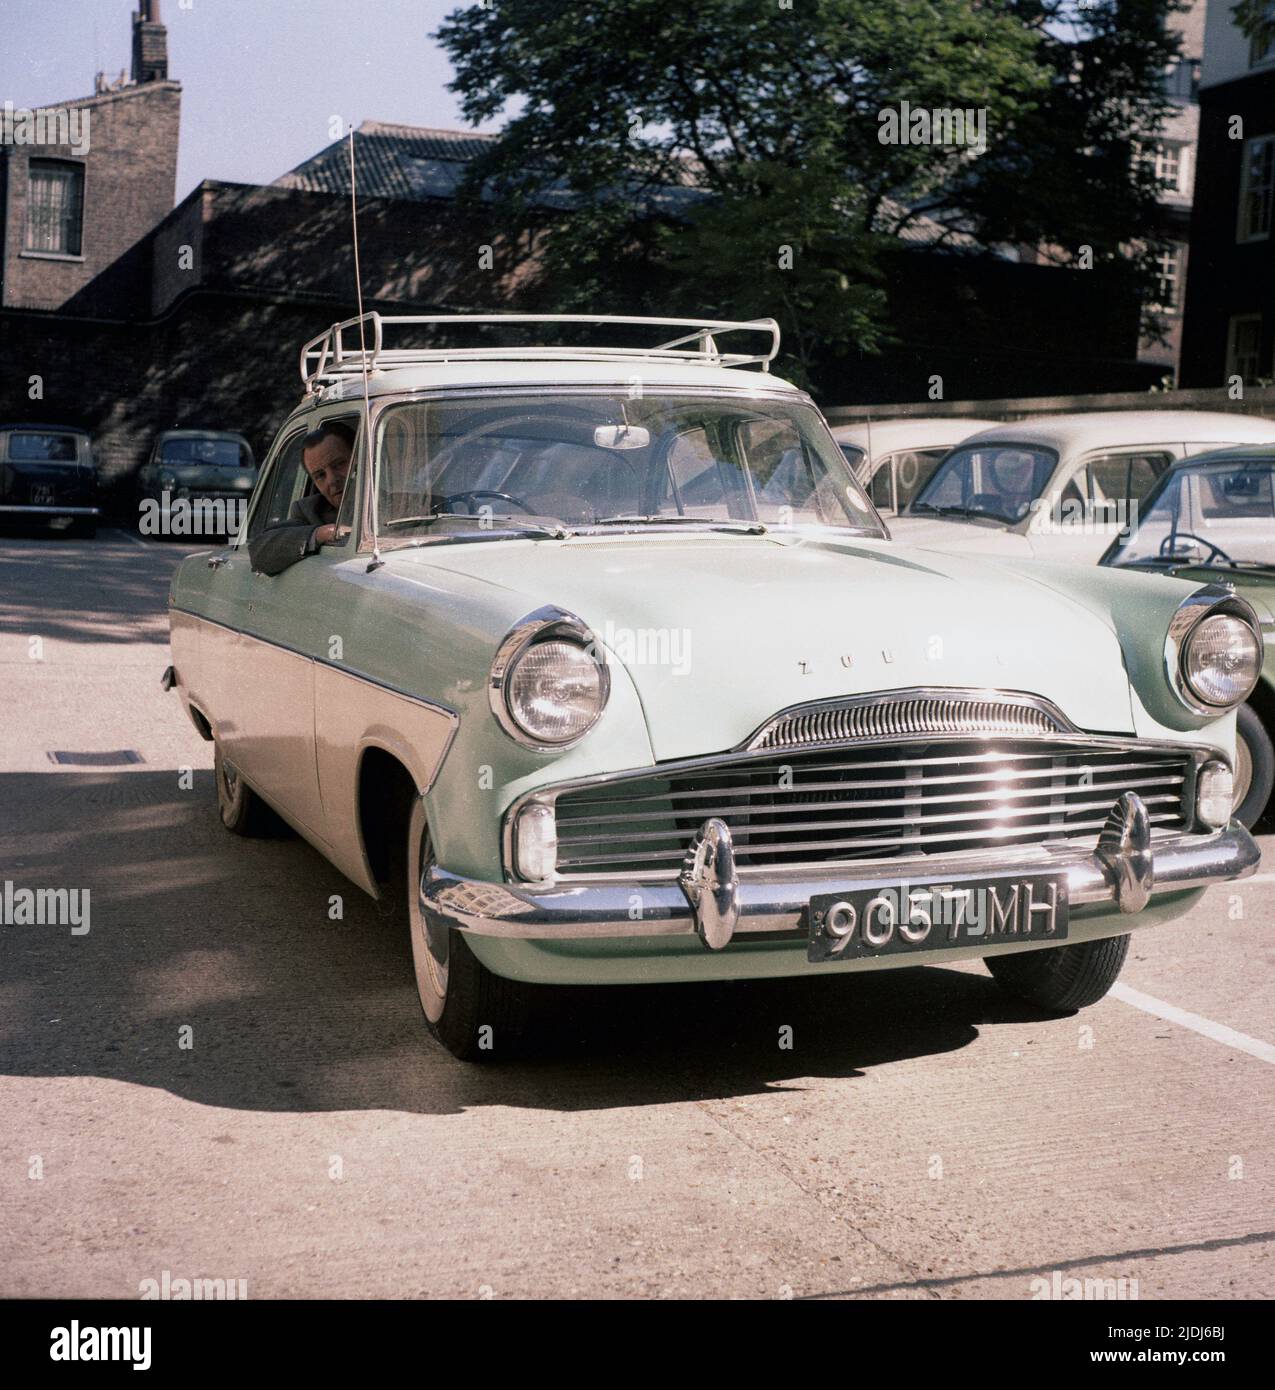 1964, historical, a gentleman sitting in a car of the era, a tone-tone, British Ford Zodiac, England, UK. Stock Photo